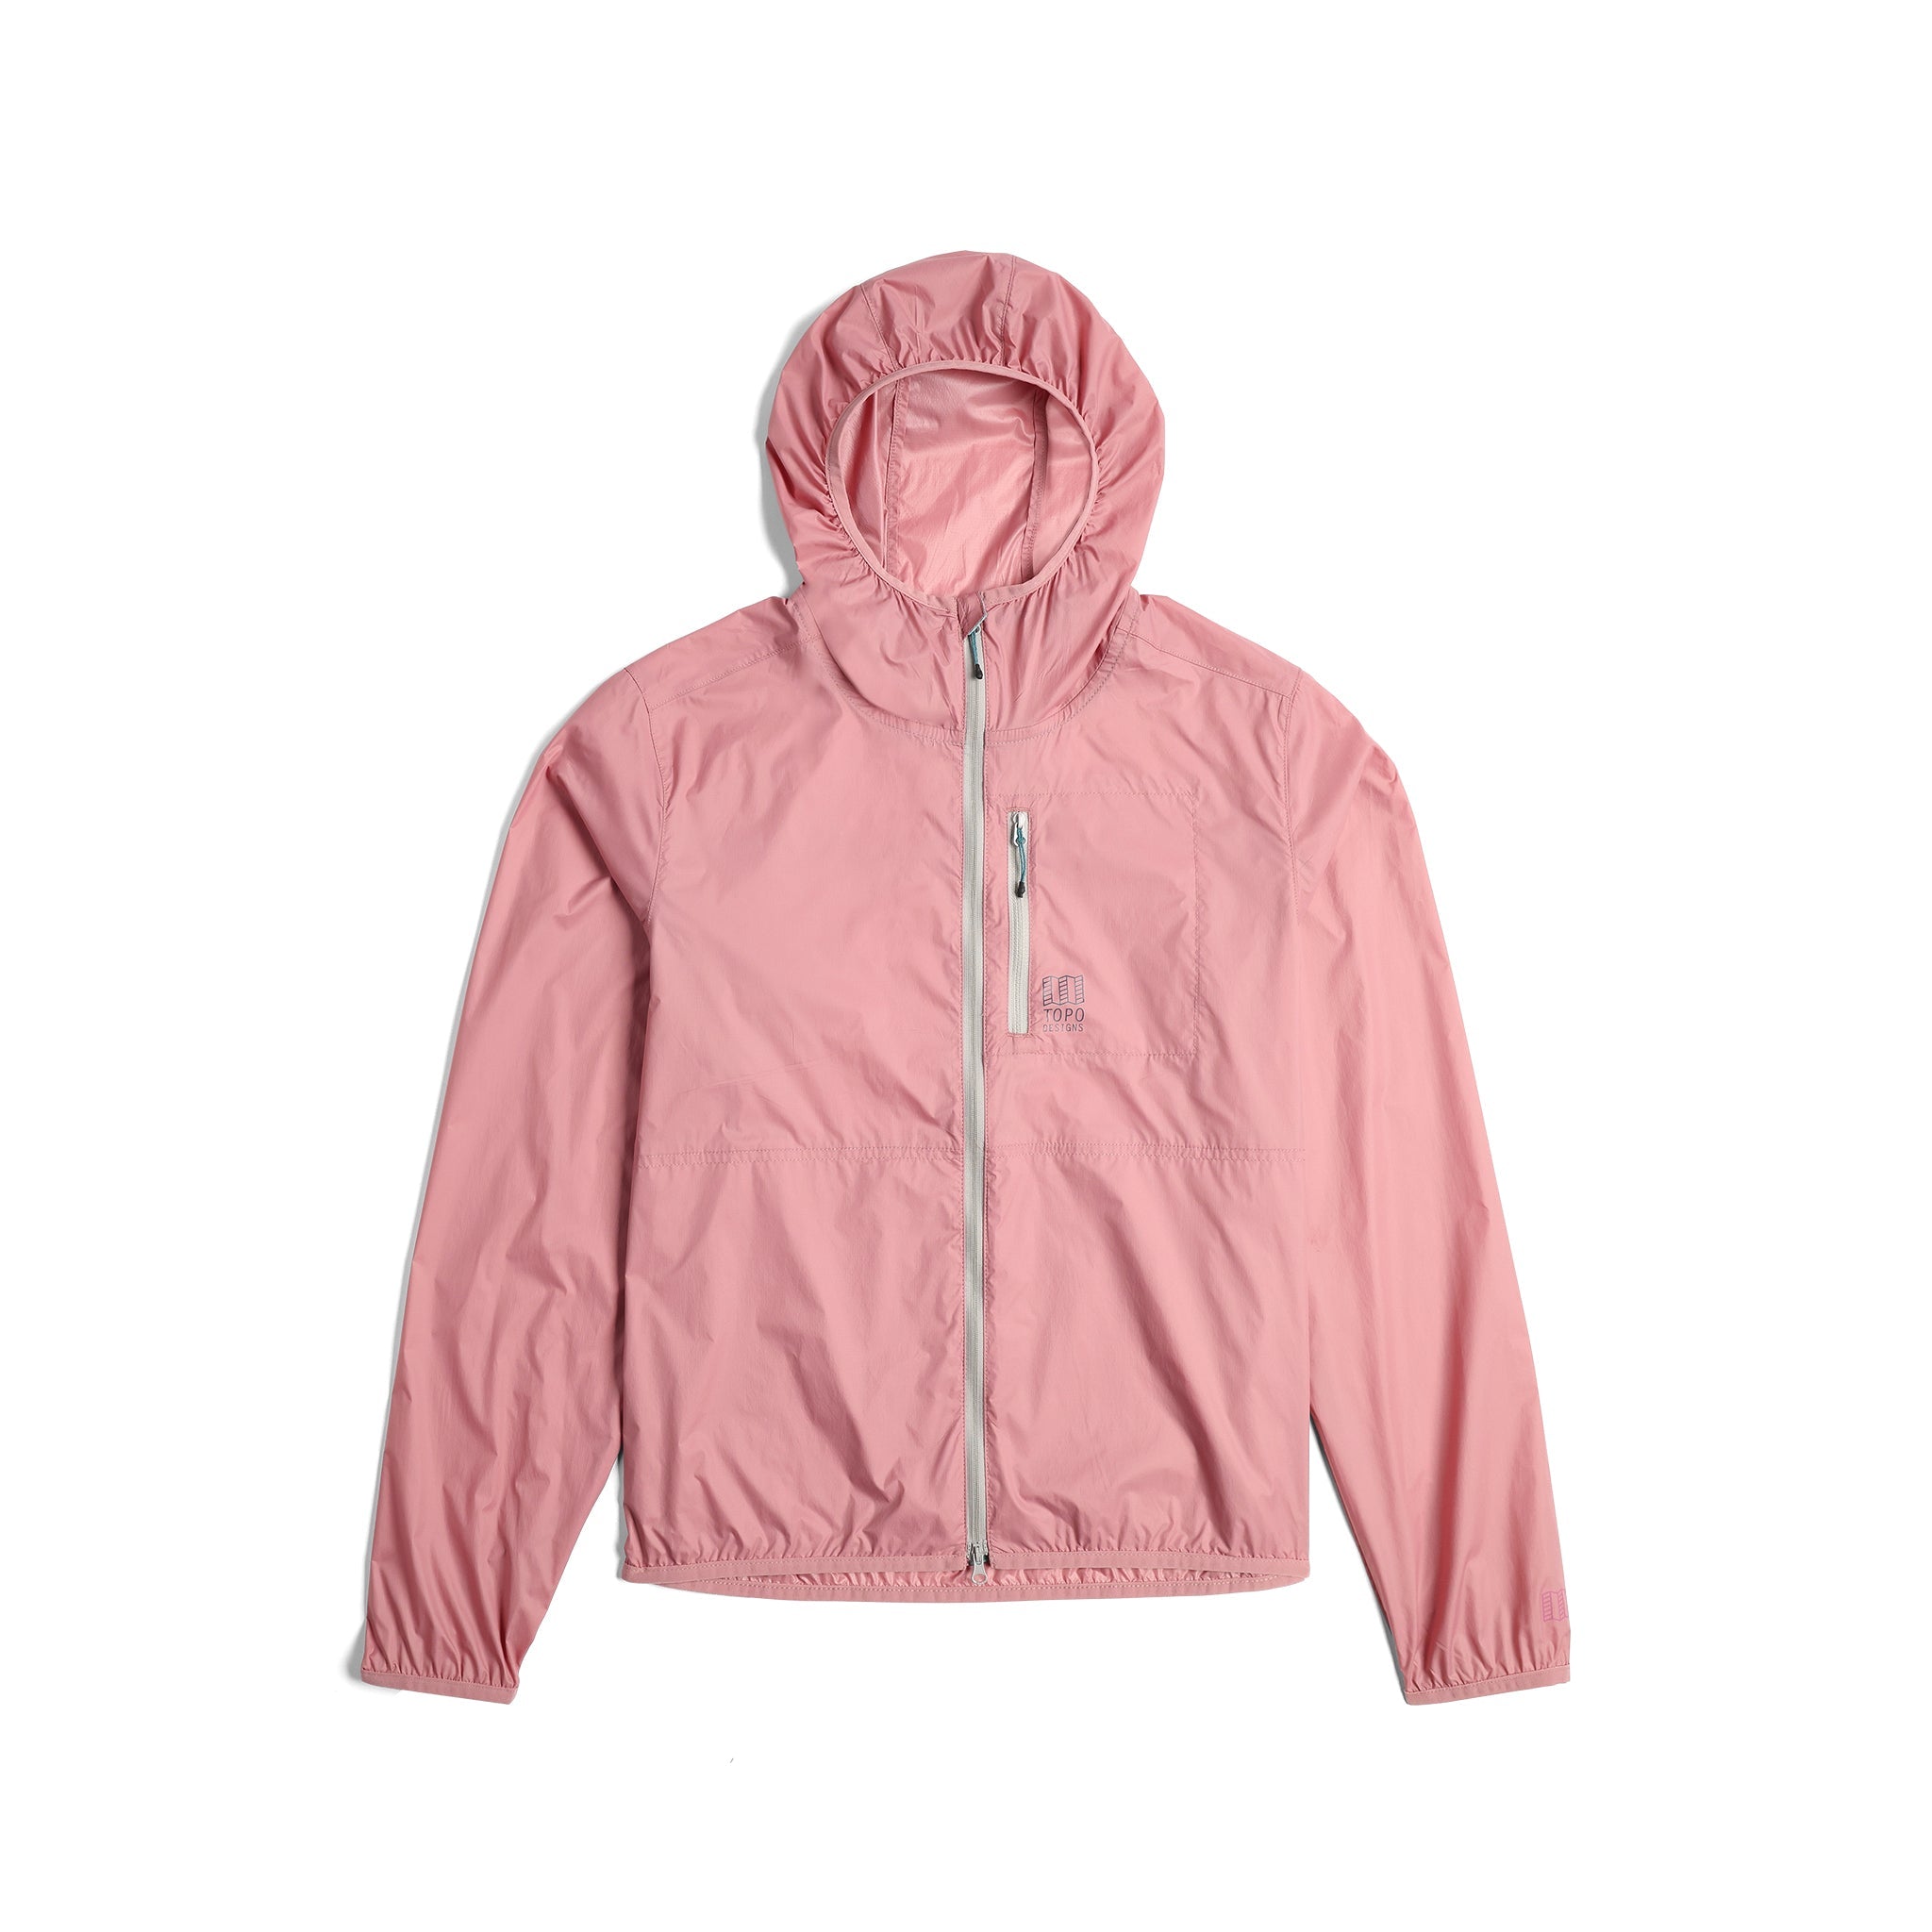 Front View of Topo Designs Global Ultralight Packable Jacket - Women's in "Rose"